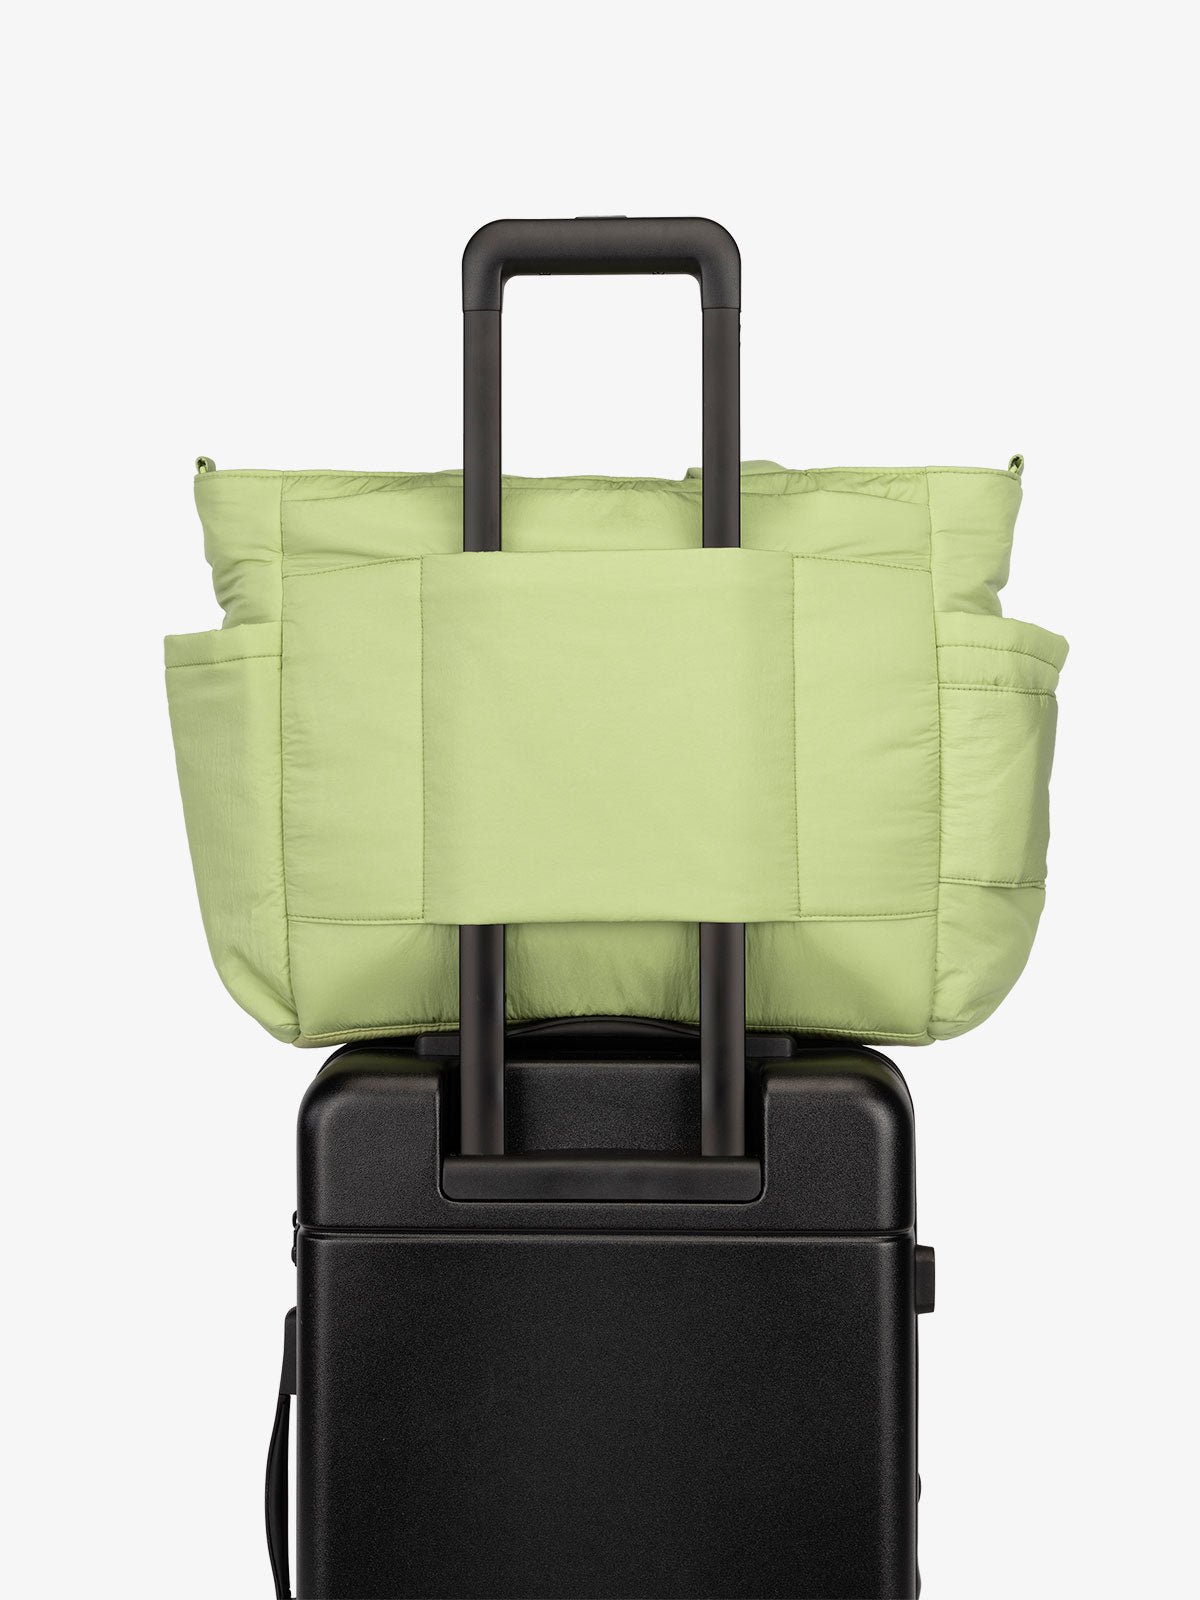 CALPAK Diaper Tote Bag with Laptop Sleeve featuring luggage trolley sleeve with back pocket in lime green